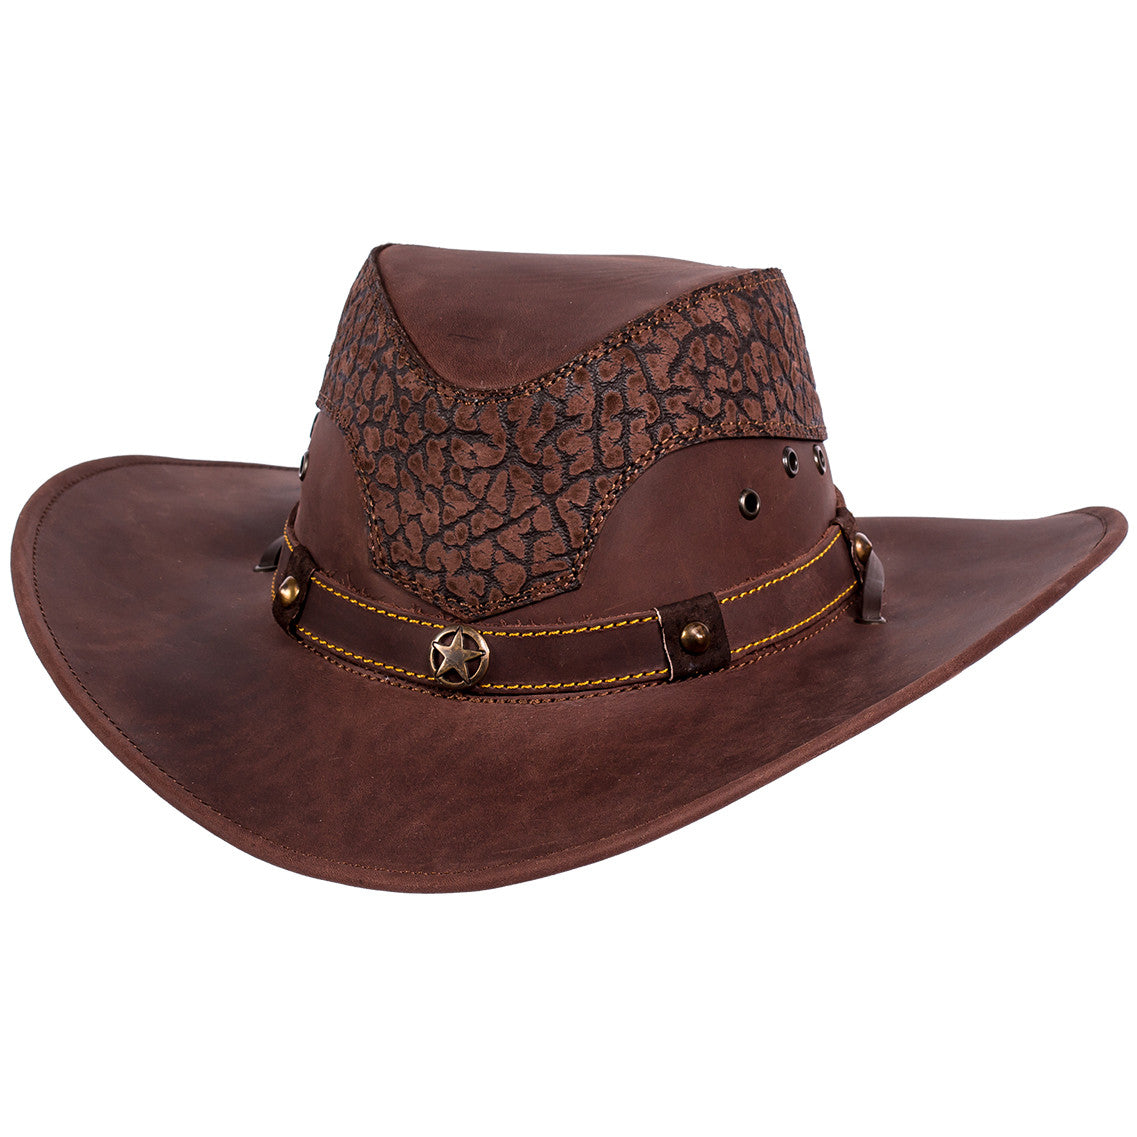 Stone leather western hat